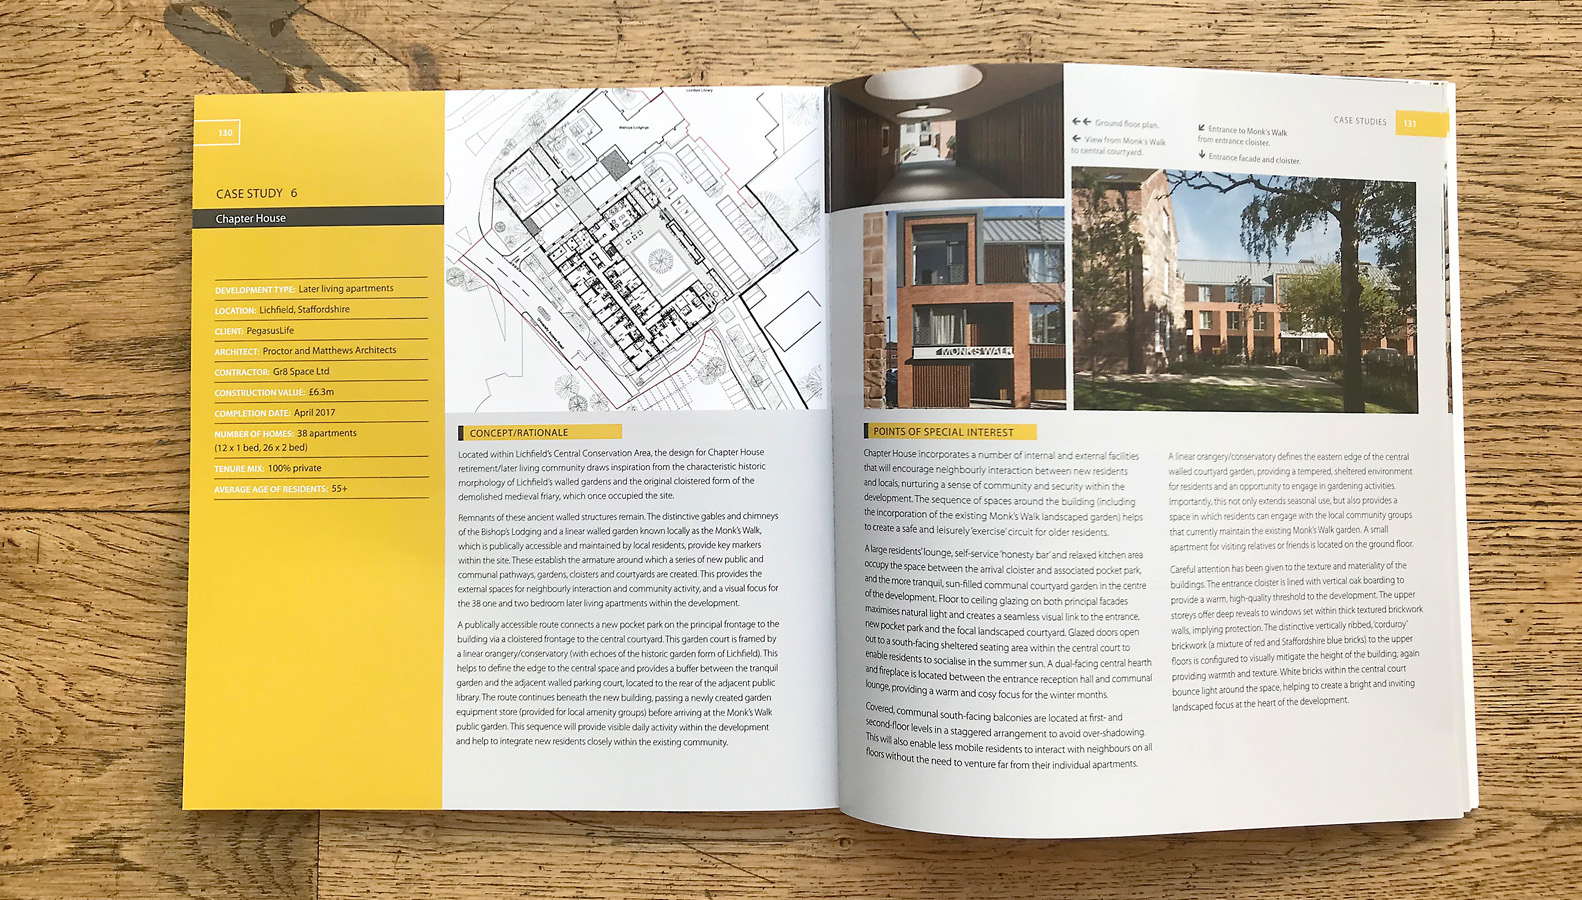 Chaper house featured in new RIBA publication on age-friendly housing